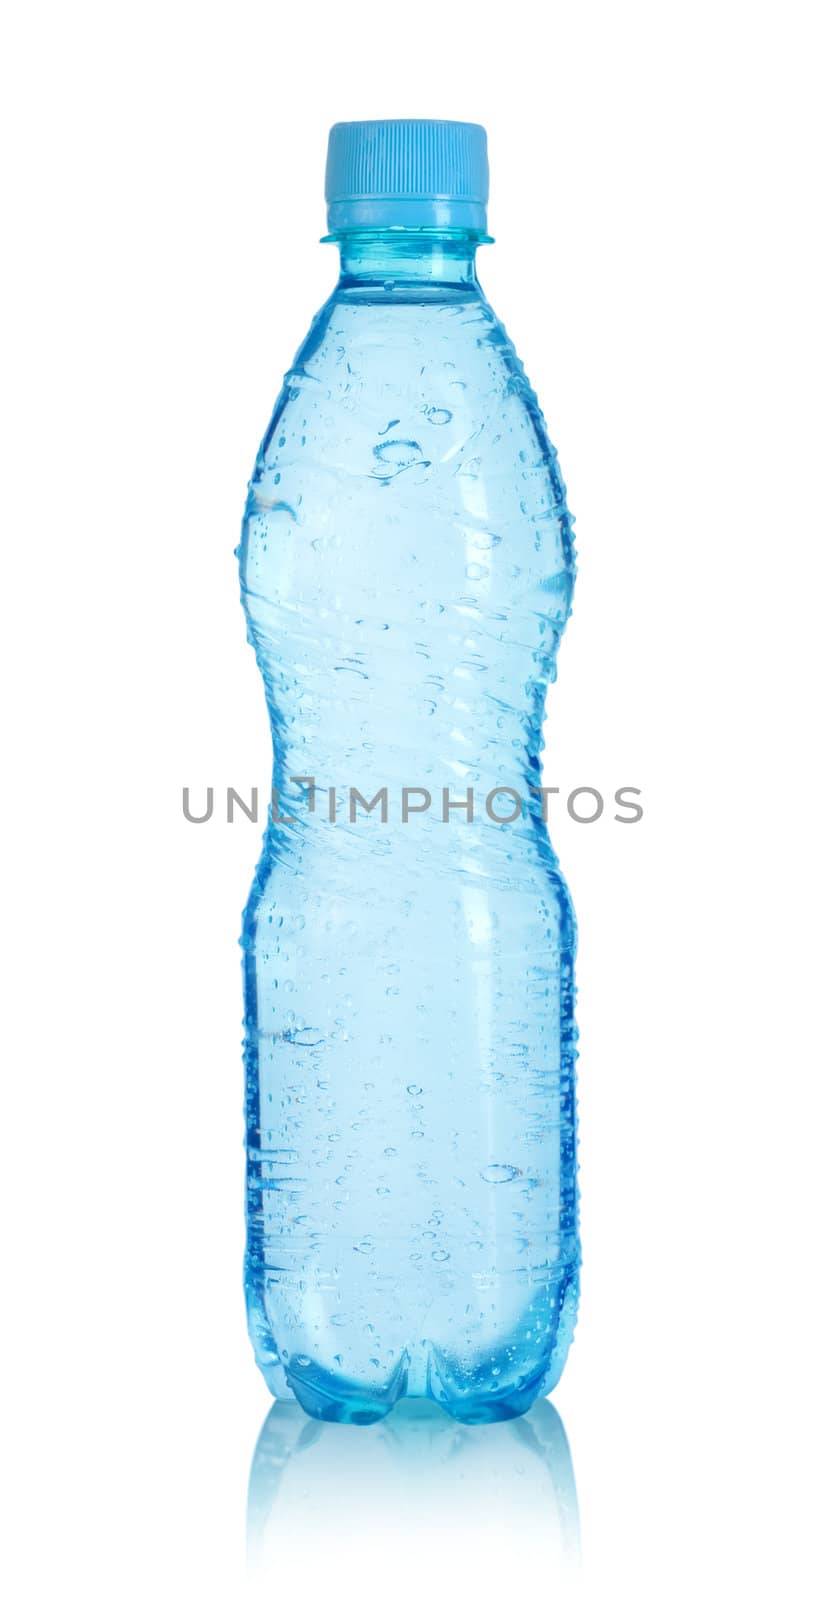 Plastic bottle of water by Givaga